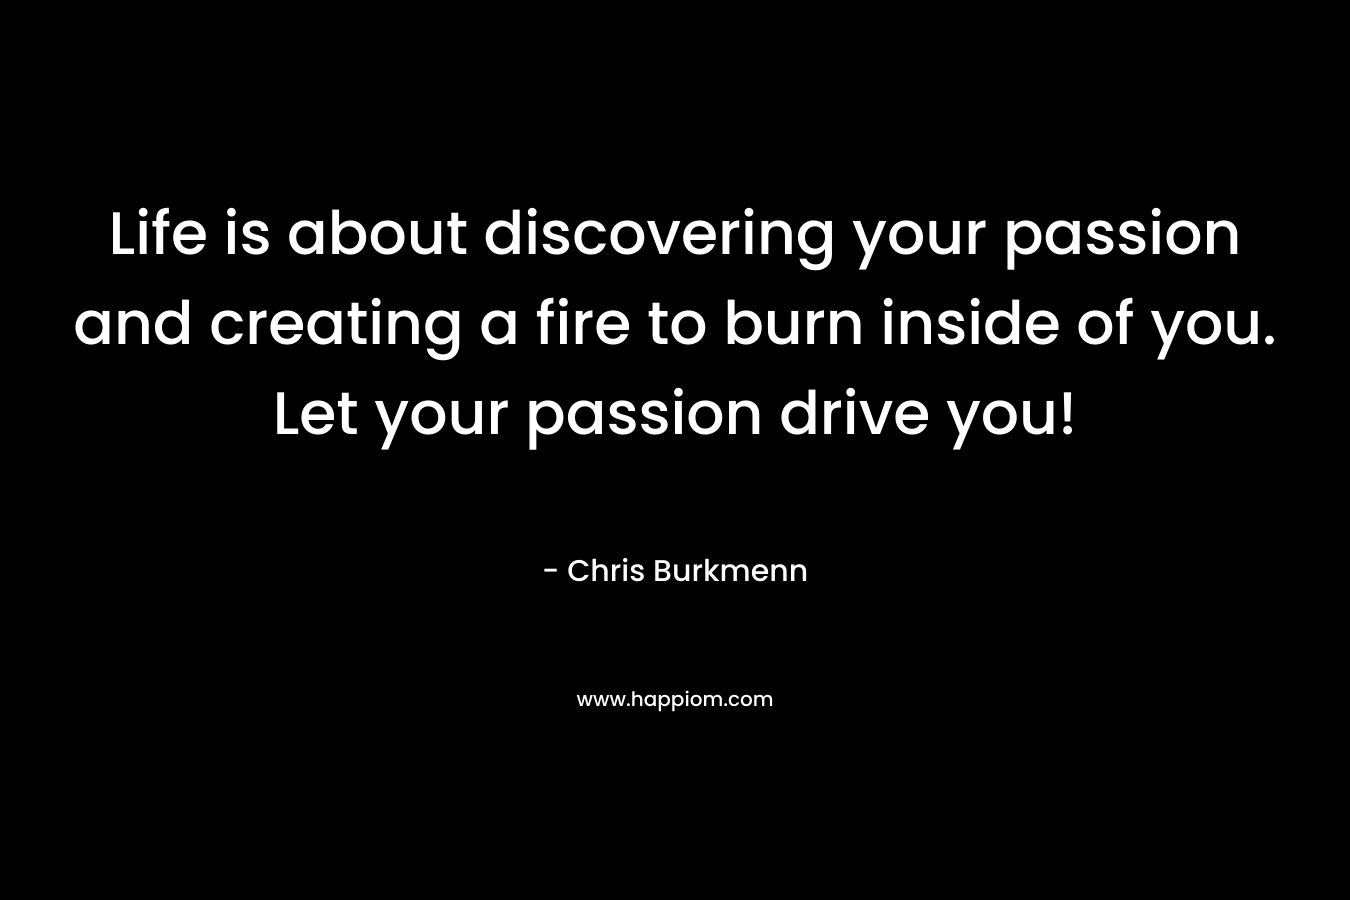 Life is about discovering your passion and creating a fire to burn inside of you. Let your passion drive you!